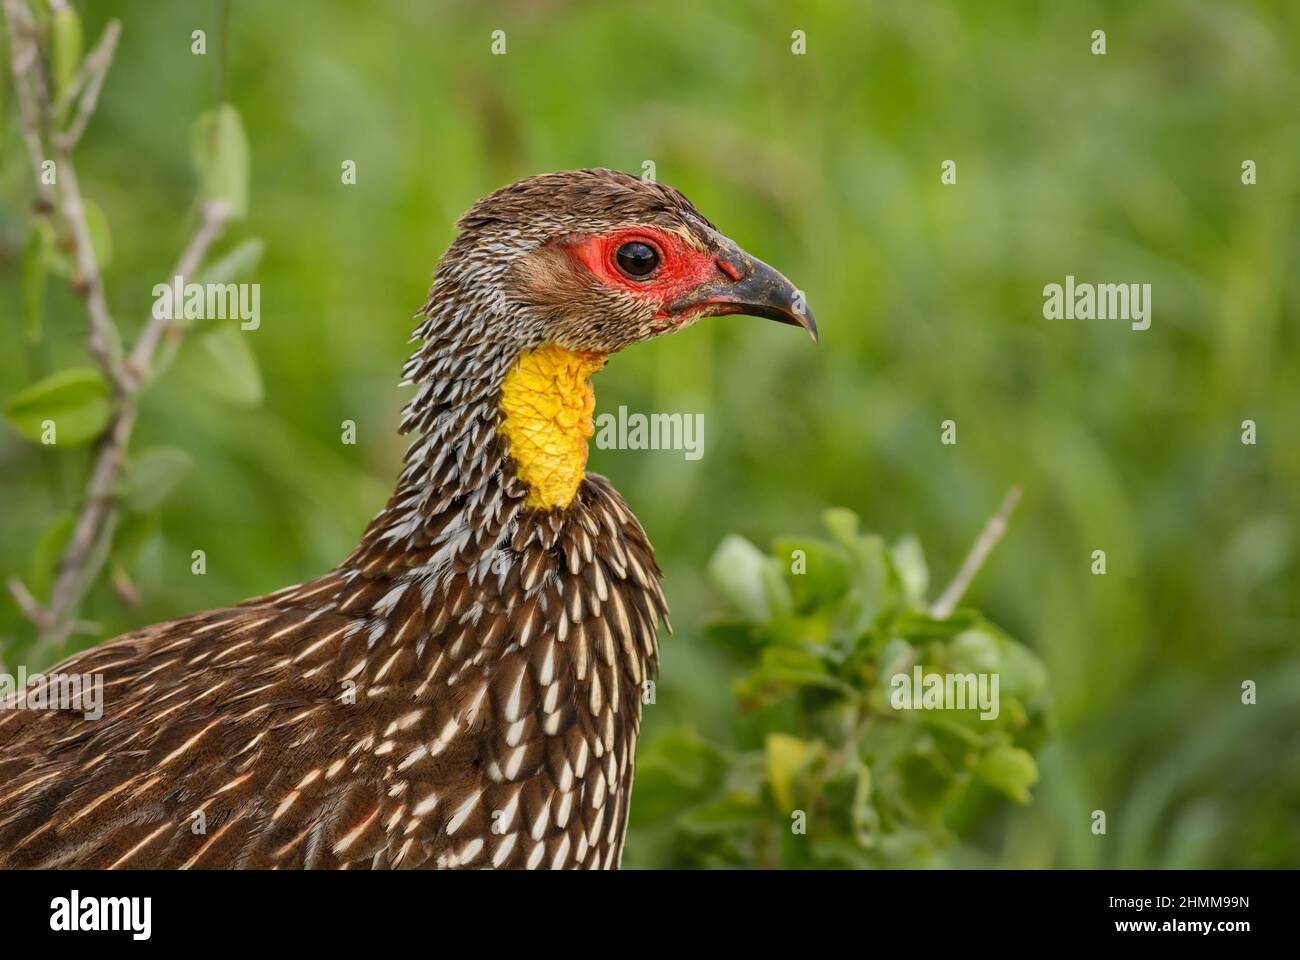 Yellow-necked Spurfowl - Pternistis leucoscepus, beautiful colored ground bird from African bushes and savannahs, Tsavo East, Kenya. Stock Photo